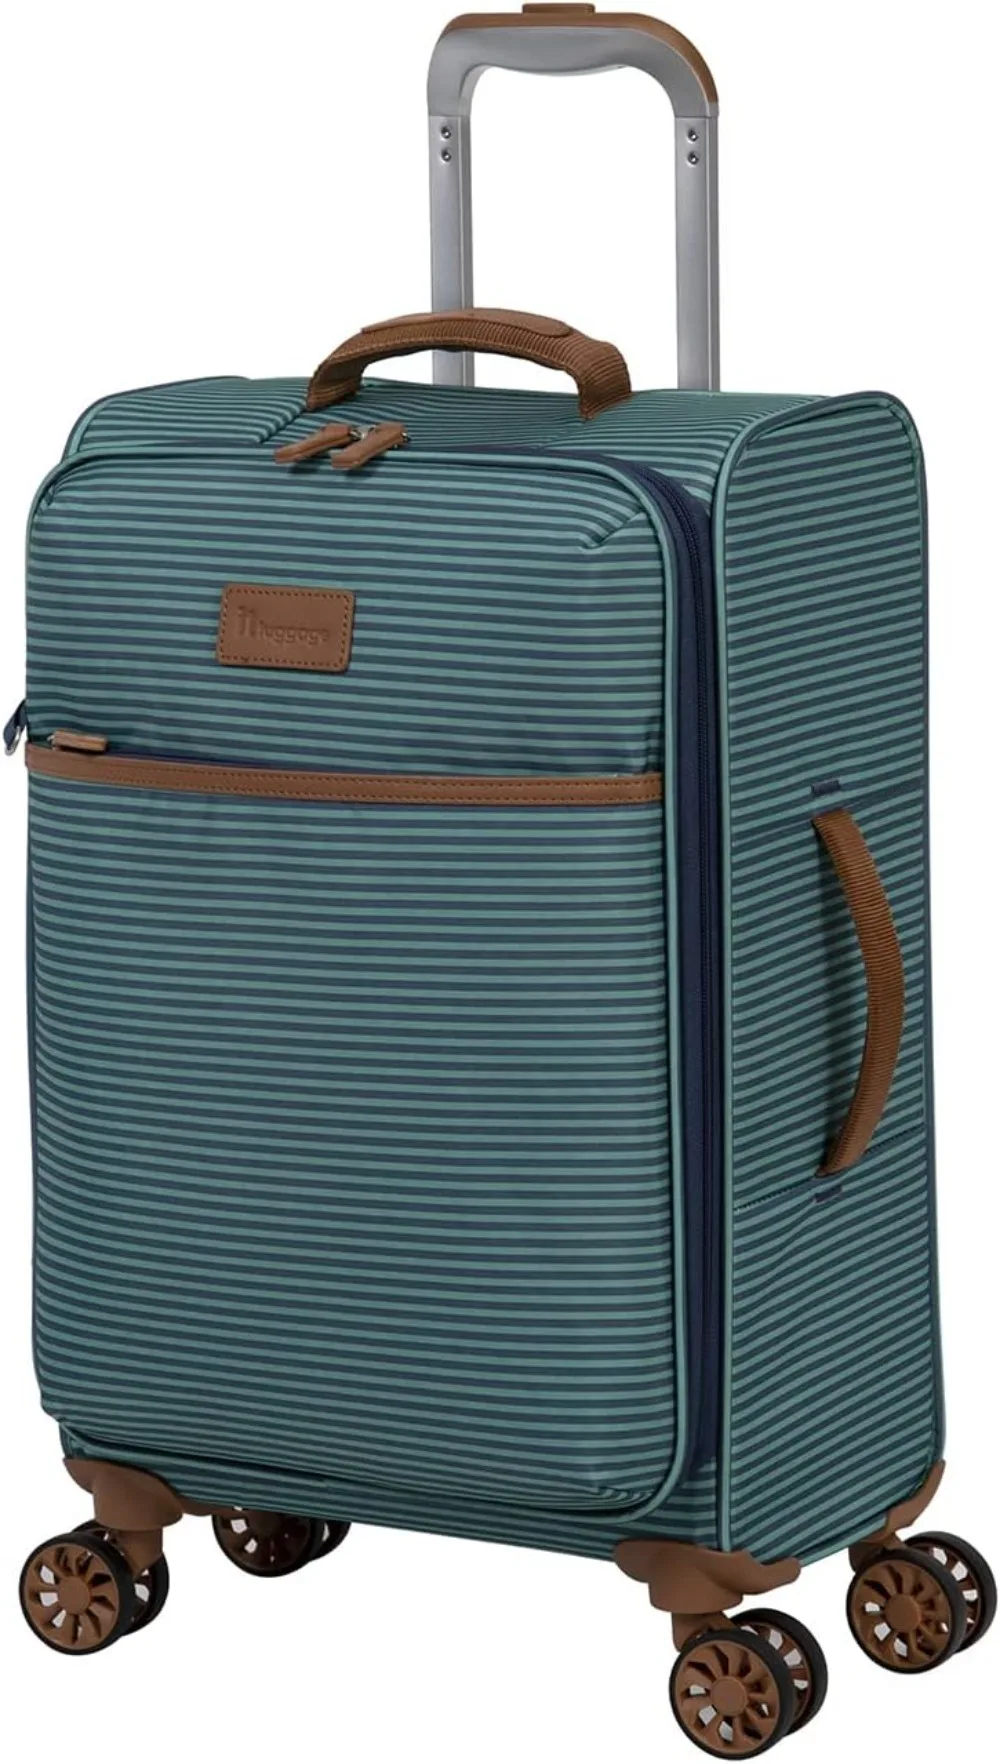 

it luggage Beach Stripes 22" Softside Carry-On 8 Overall Dimensions: 22.4 x 14.2 x 8.7 Sets Rolling Luggage Wheel Spinner, Teal